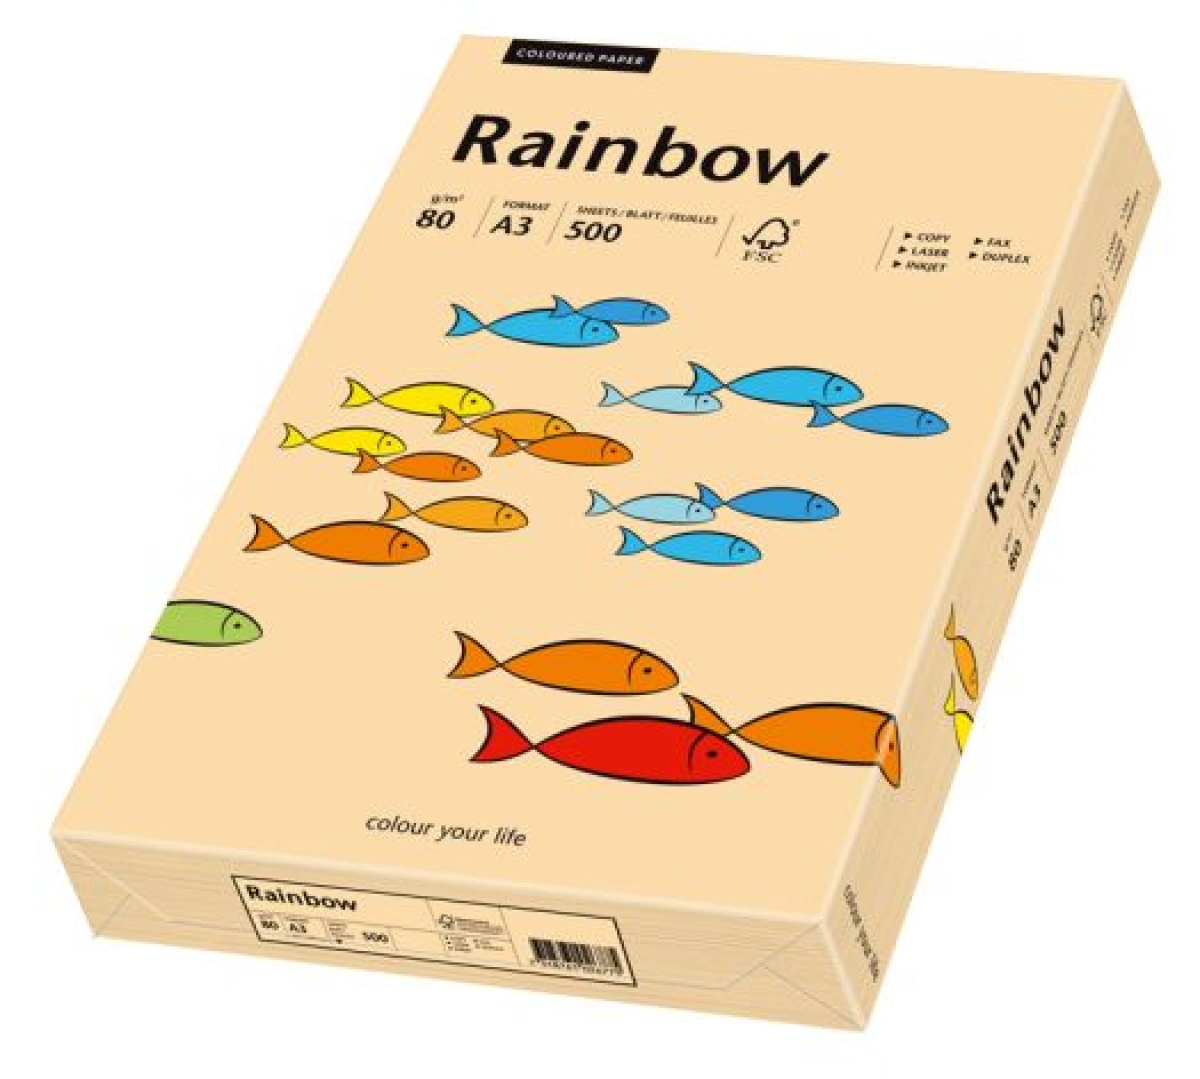 PapyrusCopy paper Sky Rainbow A3 80g 500 sheets salmon-Price for 500SheetArticle-No: 7318761038150